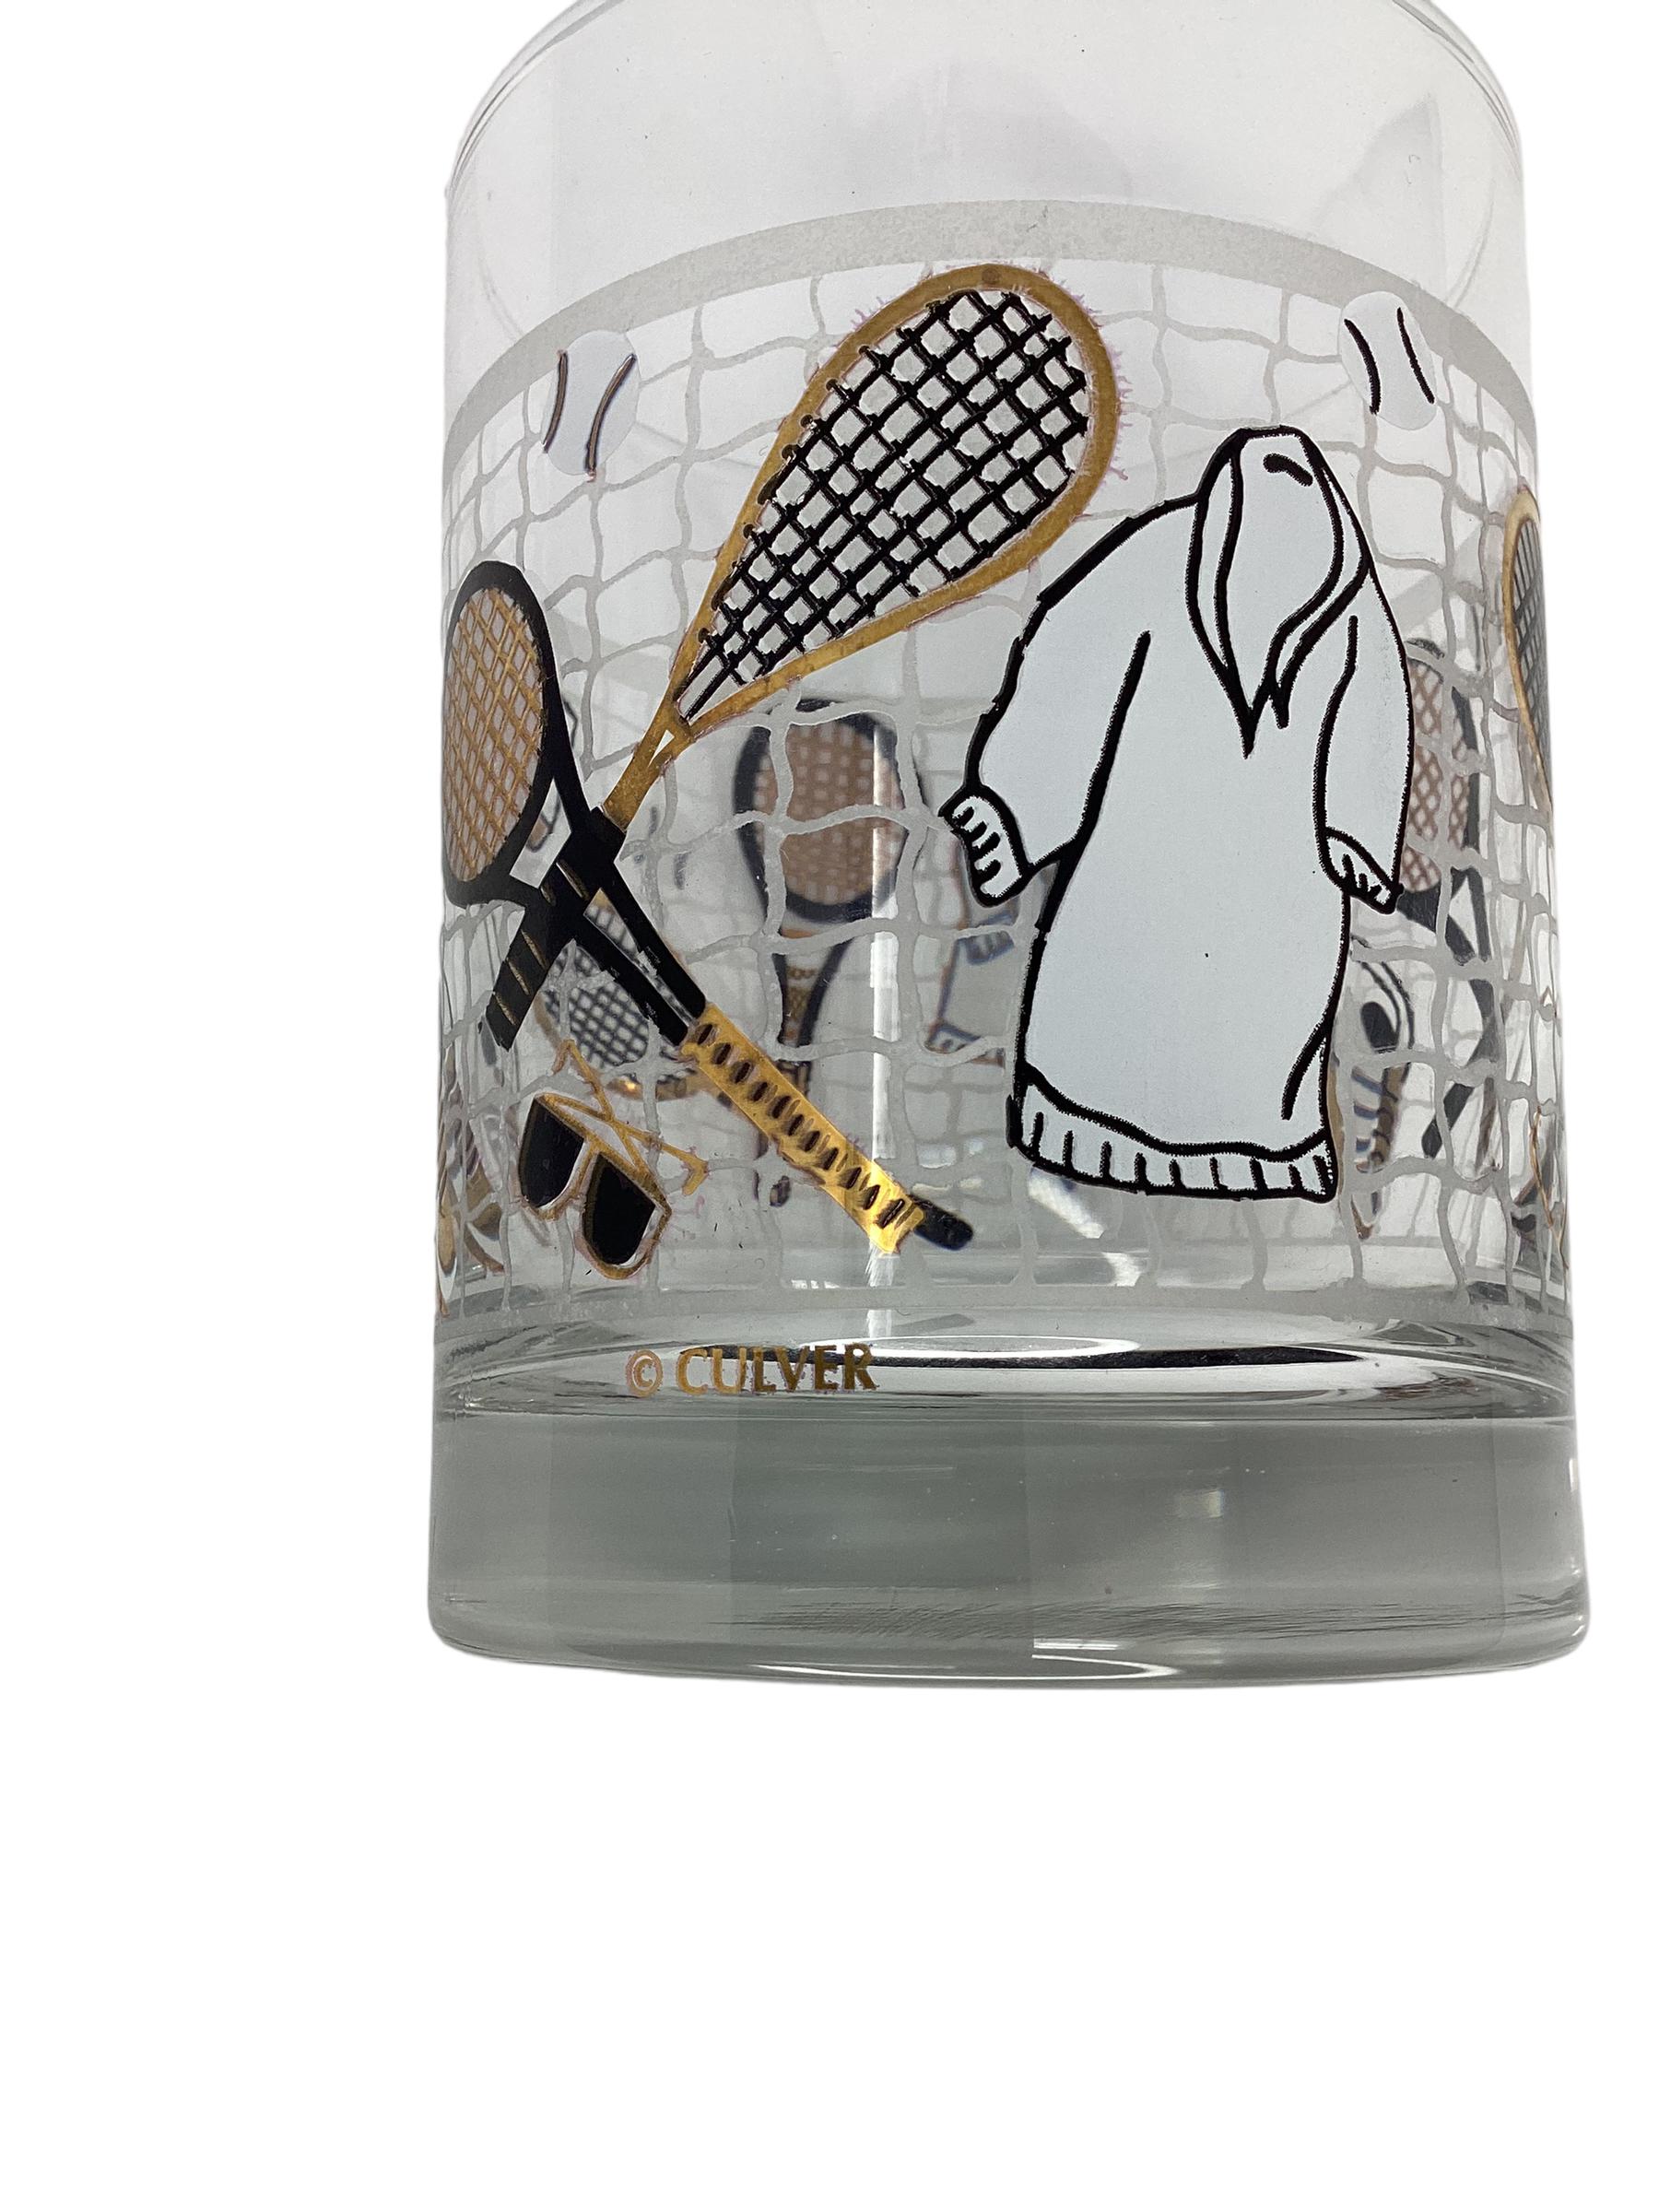 Set of 4 Culver Tennis Rocks Glasses. Decorated with gold and black tennis rackets, tennis shoes, sun glasses, warm up robe and tennis ball super imposed on a tennis net.